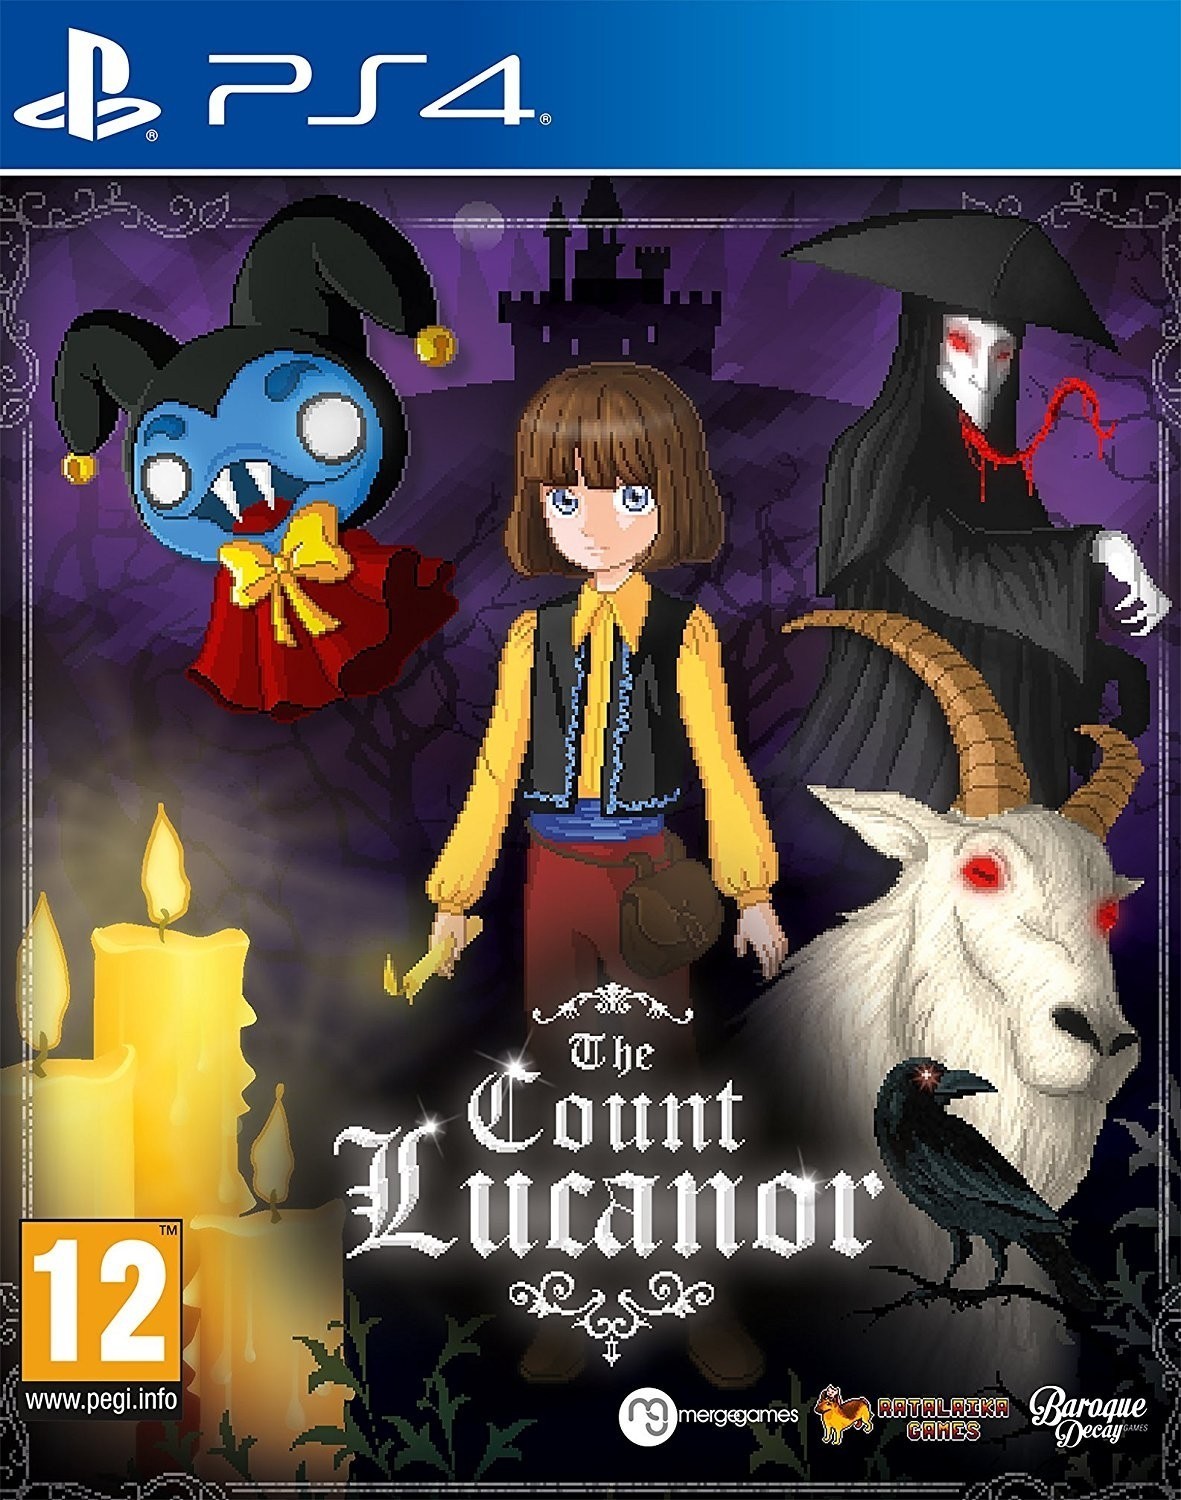 The Count Lucanor  (PS4), Merge Games